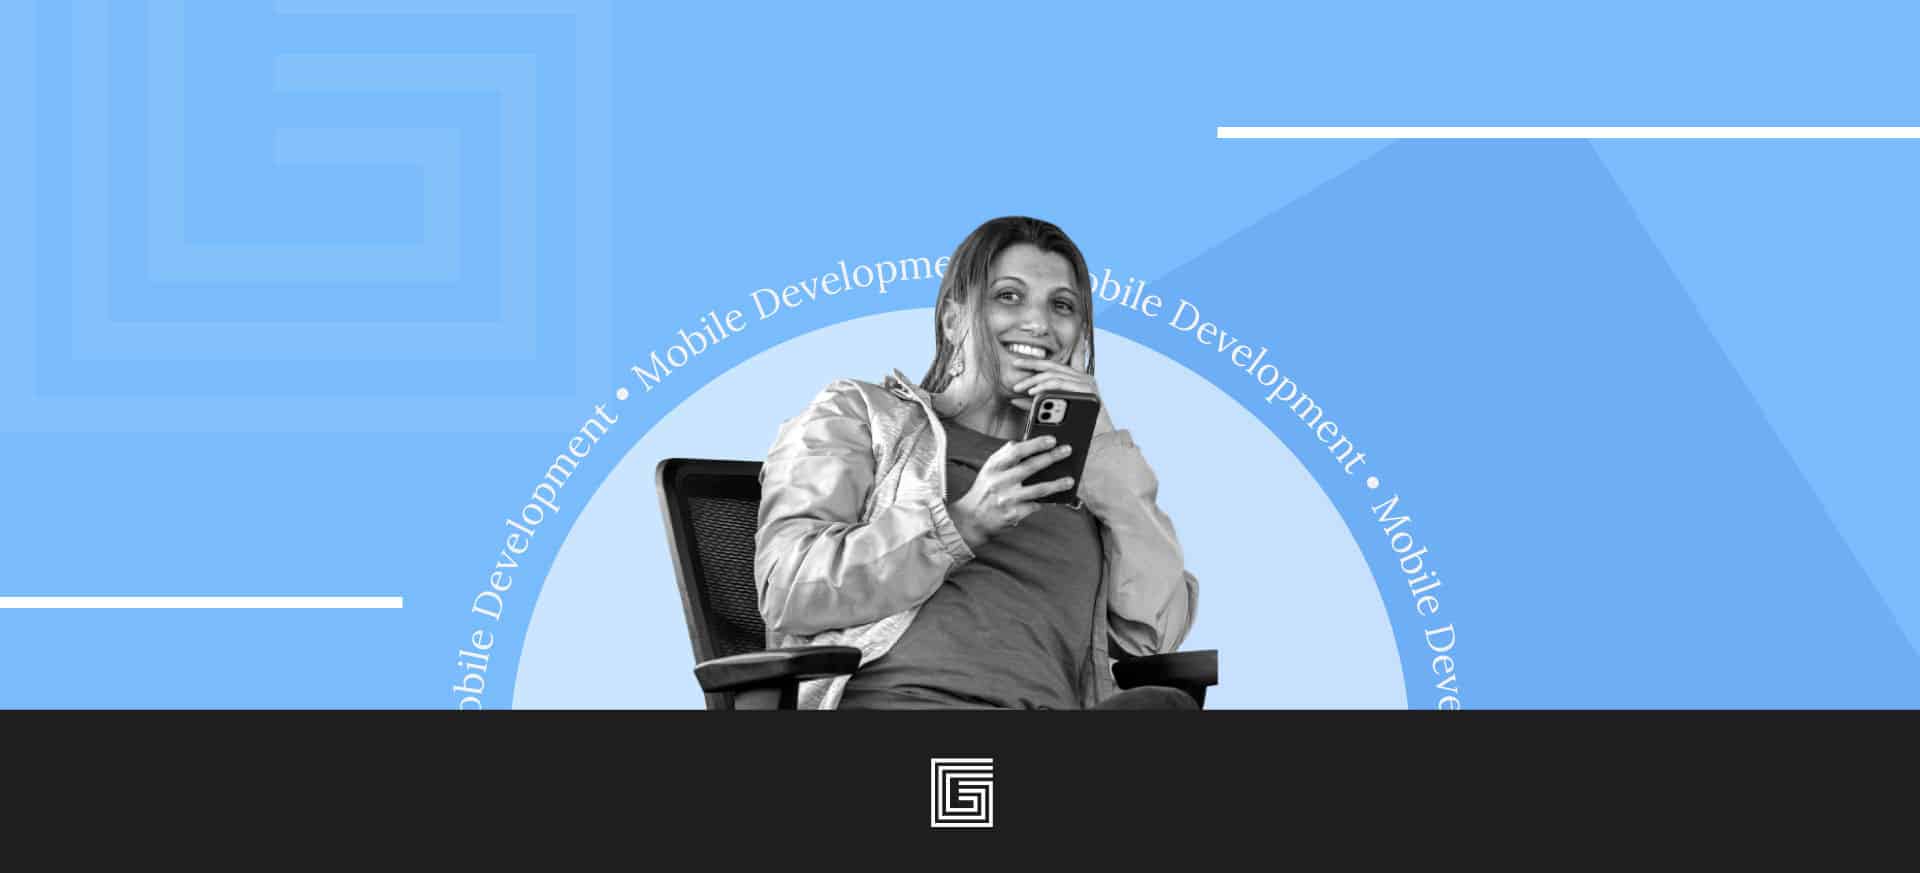 5 Things to Look For in a Mobile App Development Partner